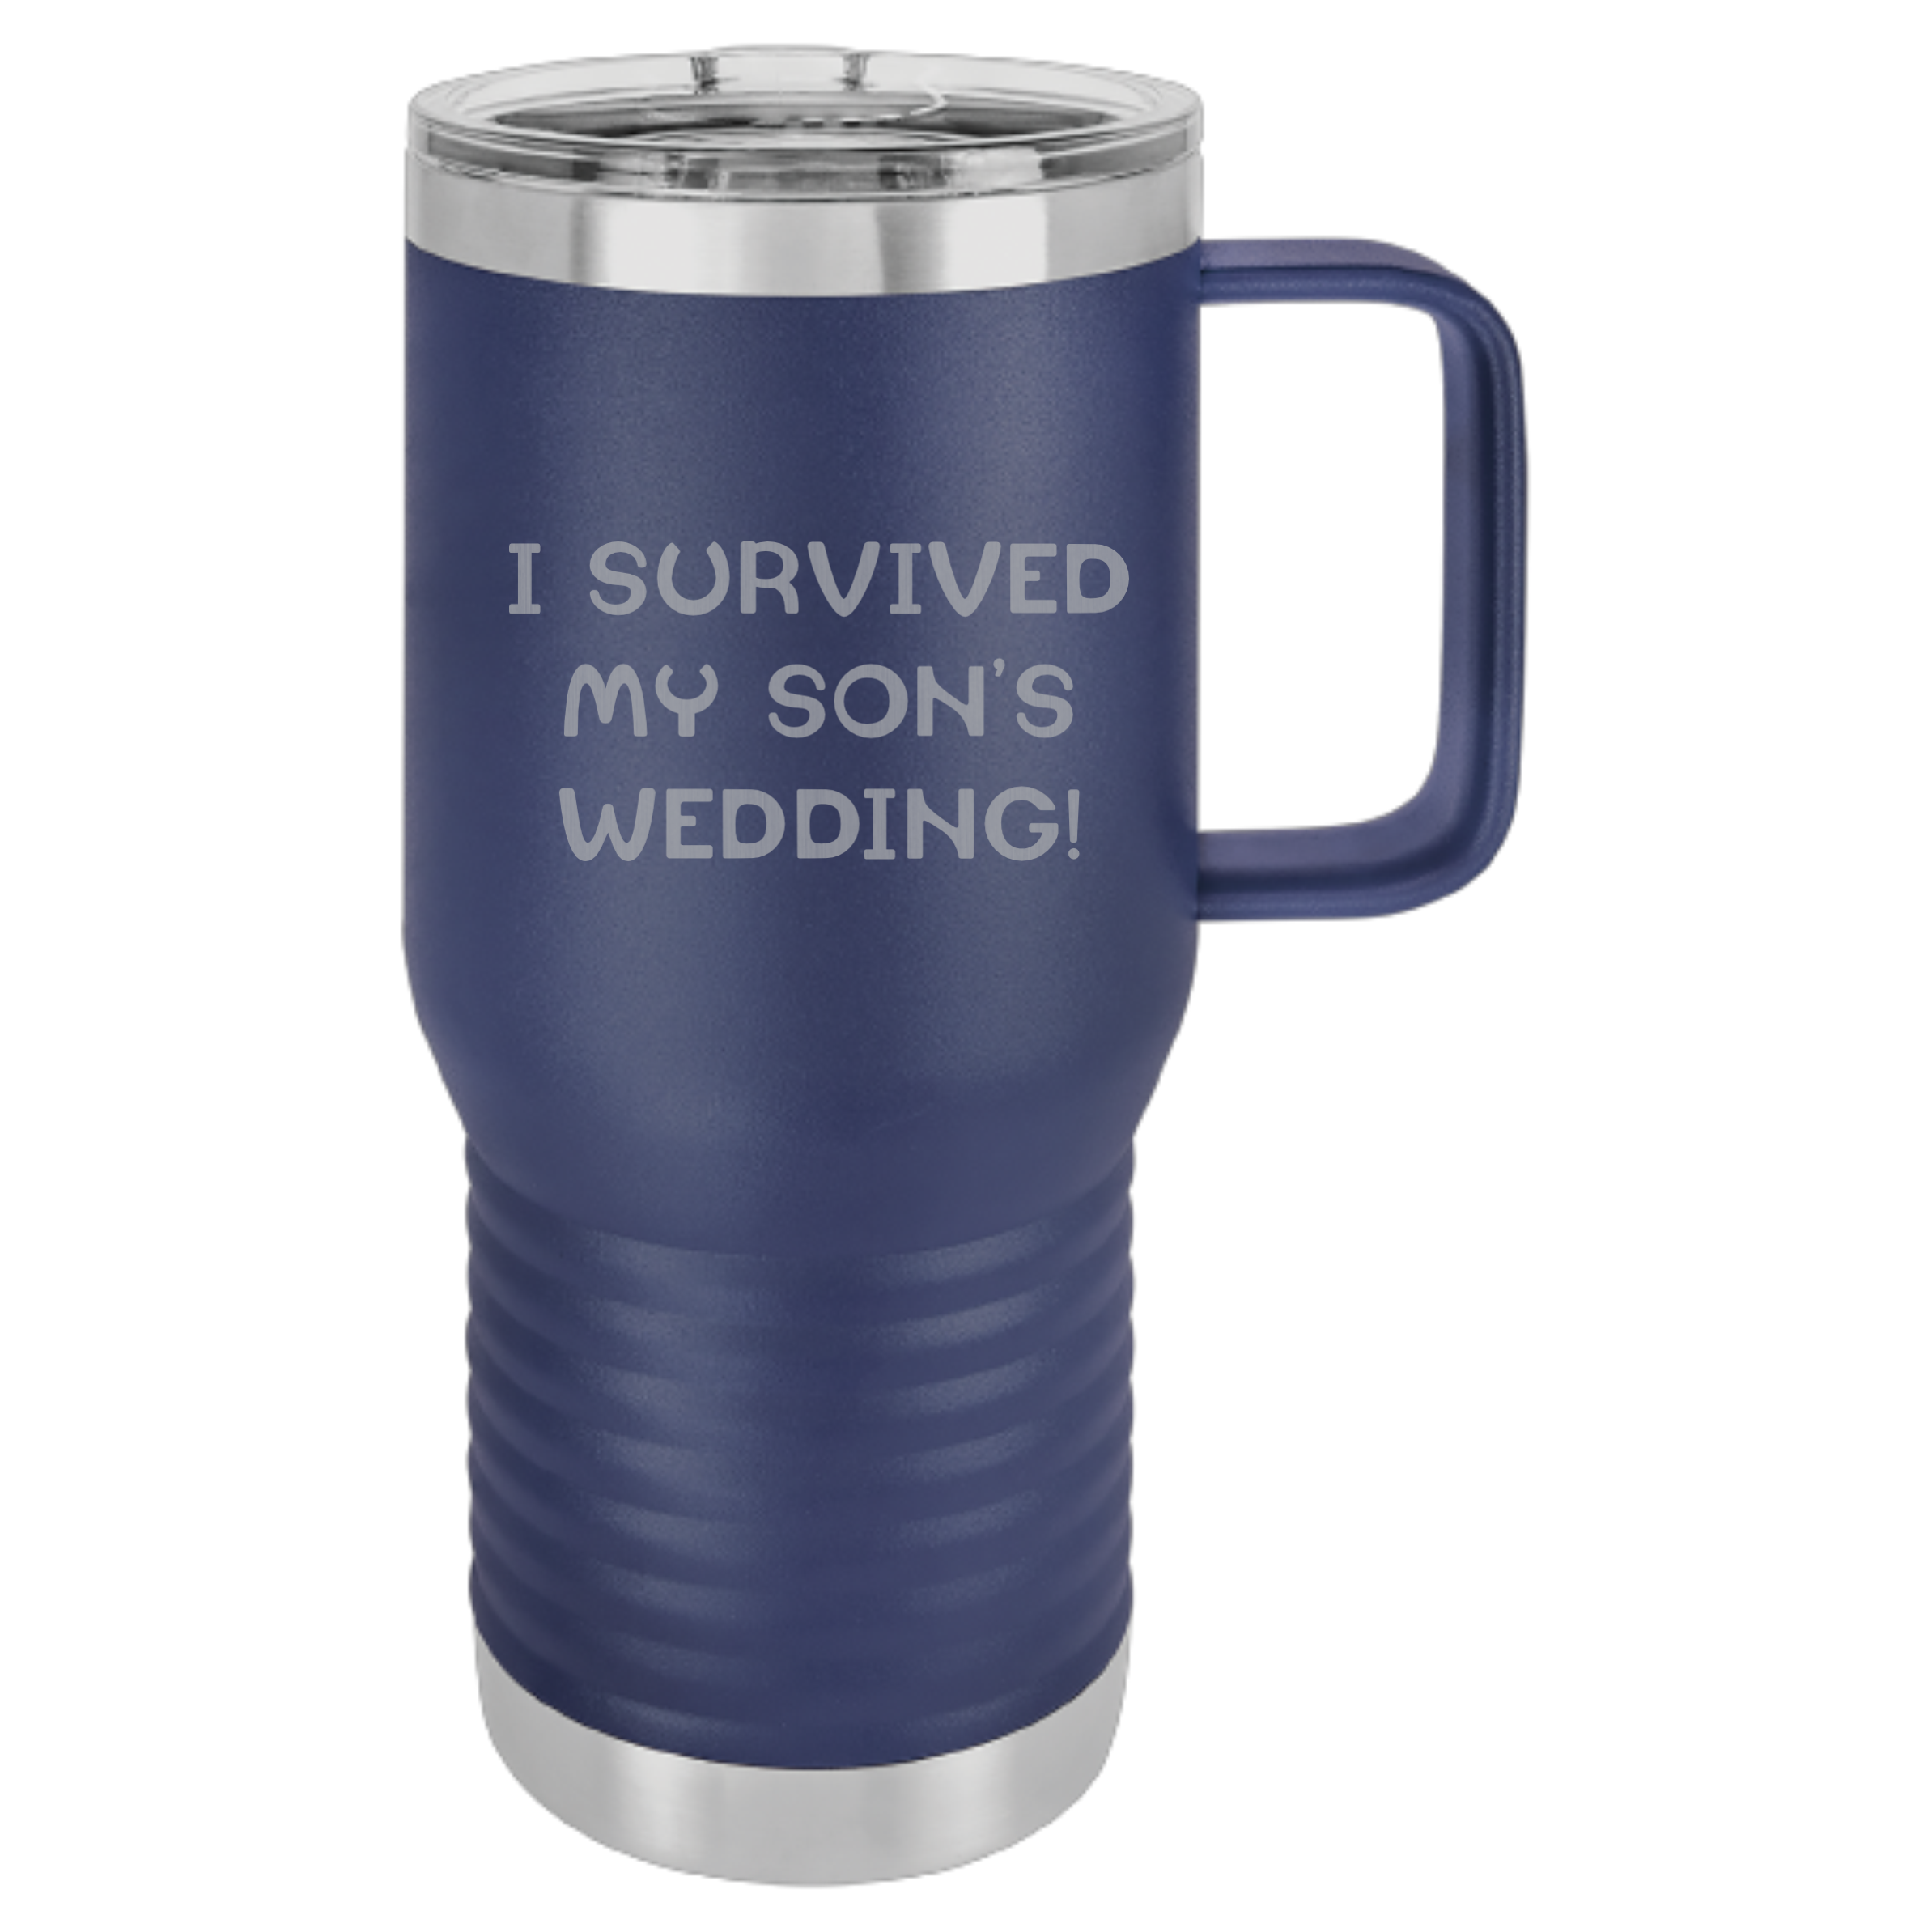 I Survived my Son or Daughter's Wedding - Polar Camel - Laser Engraved - Father of the Bride or Groom Gift - Fast Turn Around Time - High Quality